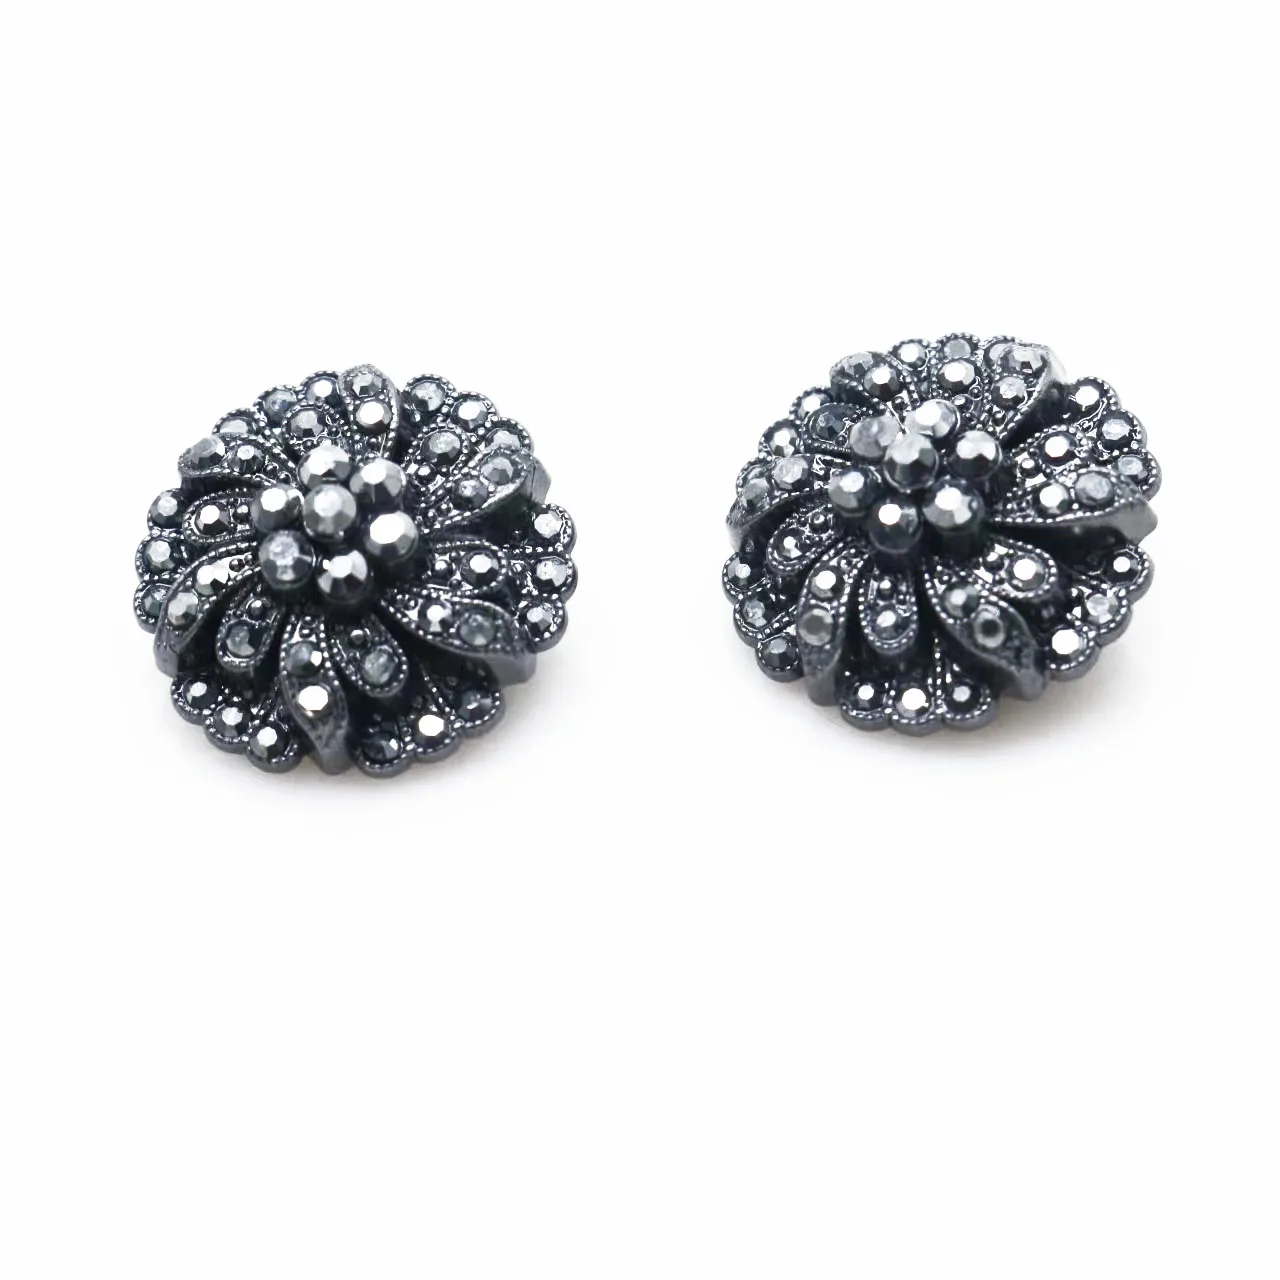 

5pcs/lot 25MM Black metal Buttons Diamante rhinestone button DIY for Wedding Decoratio sewing Clothing buttons